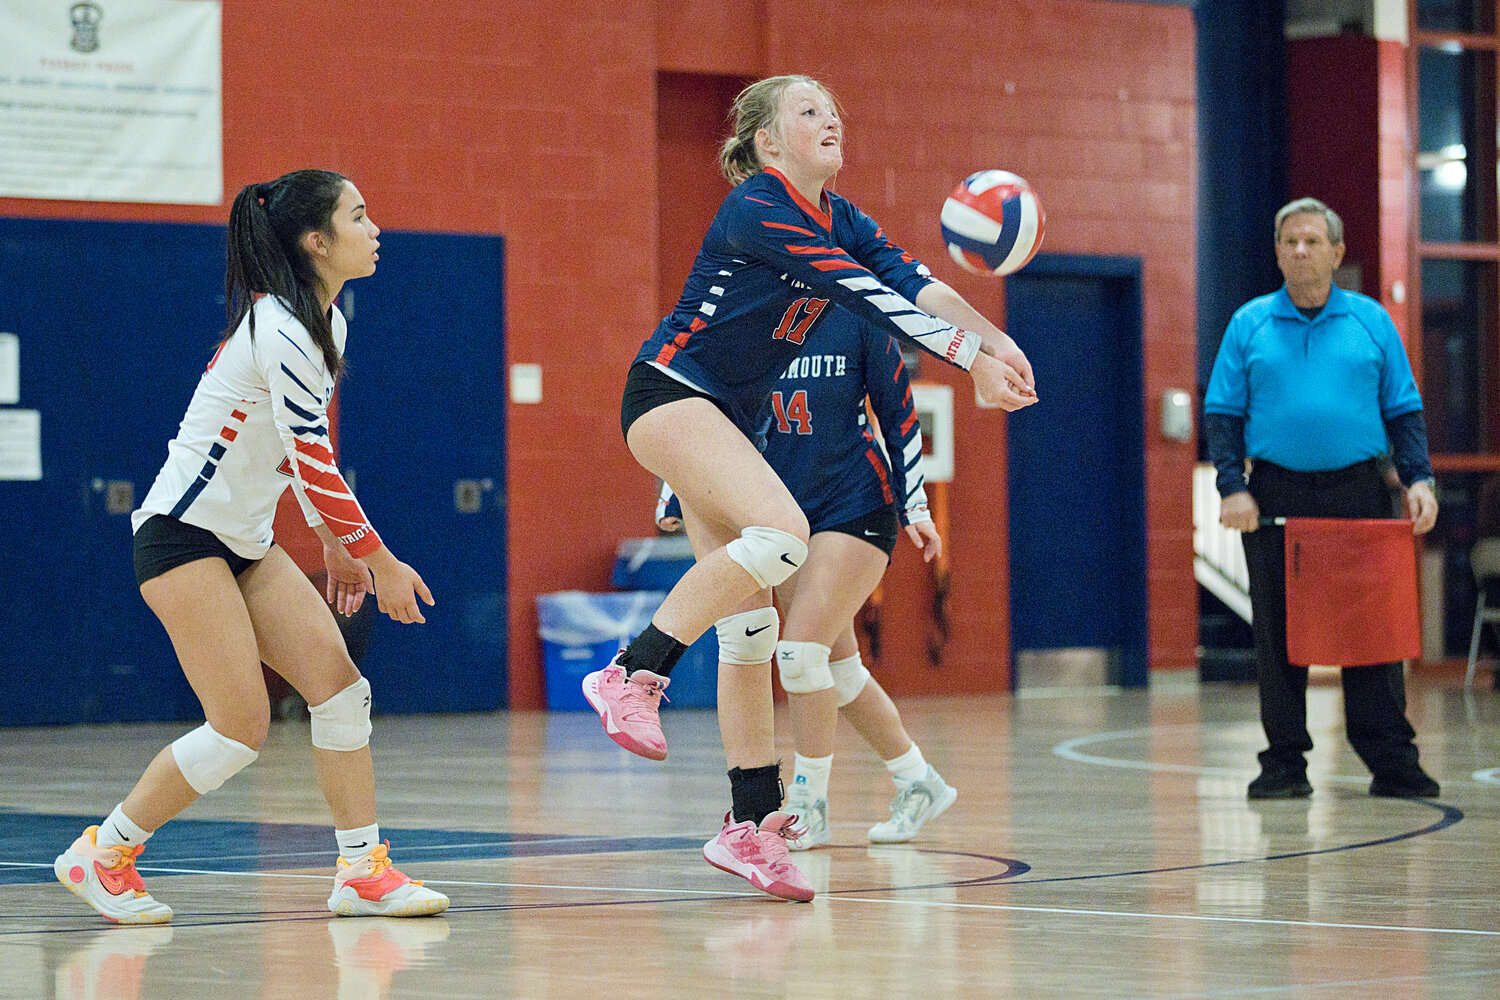 Avery Pelletier passes the ball while rallying with La Salle.